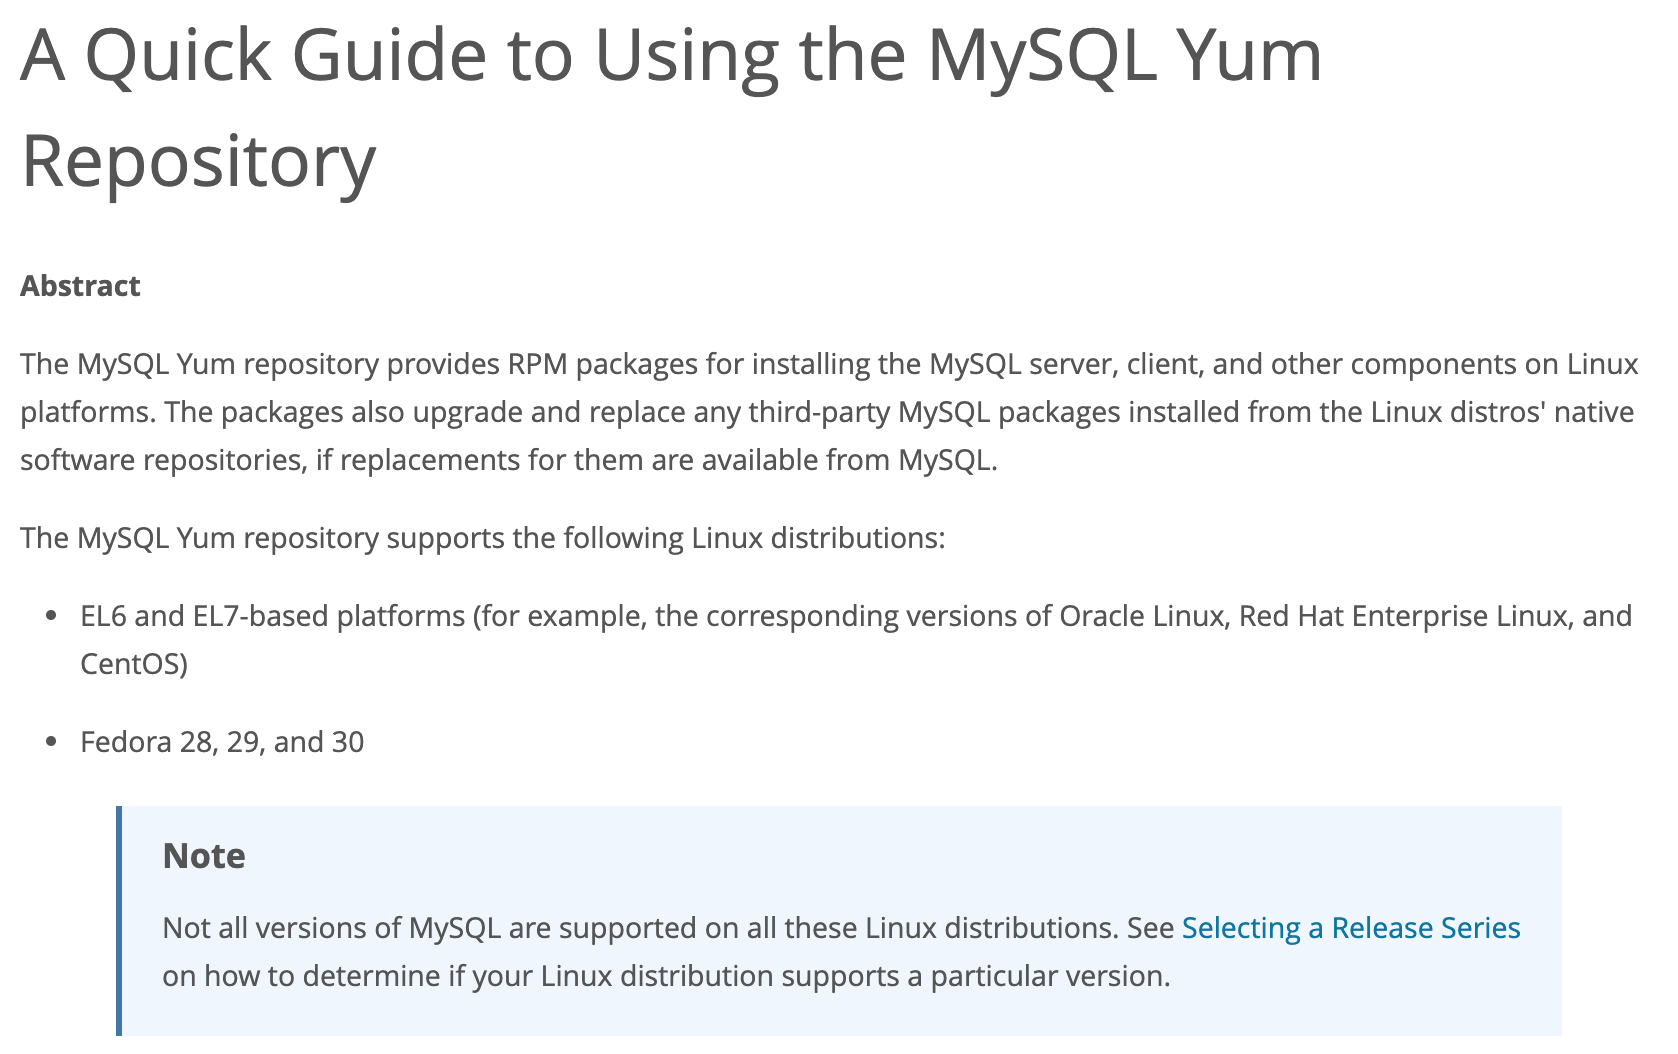 The MySQL Yum Repository gives you a convenient and simple way to update or install MySQL's various products using Yum.